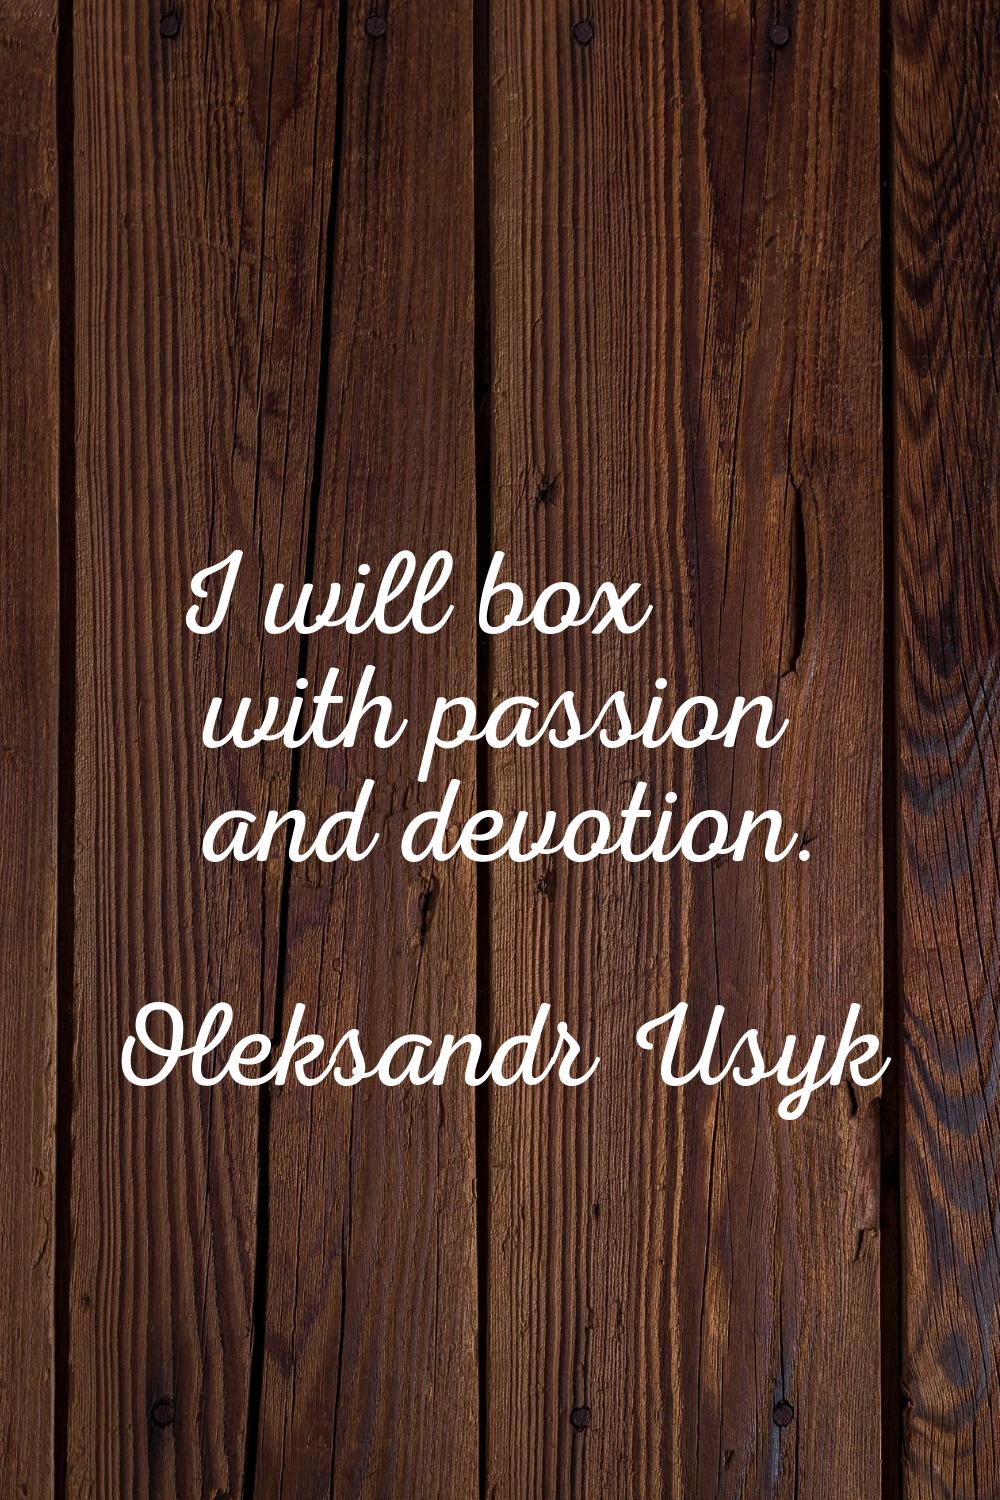 I will box with passion and devotion.